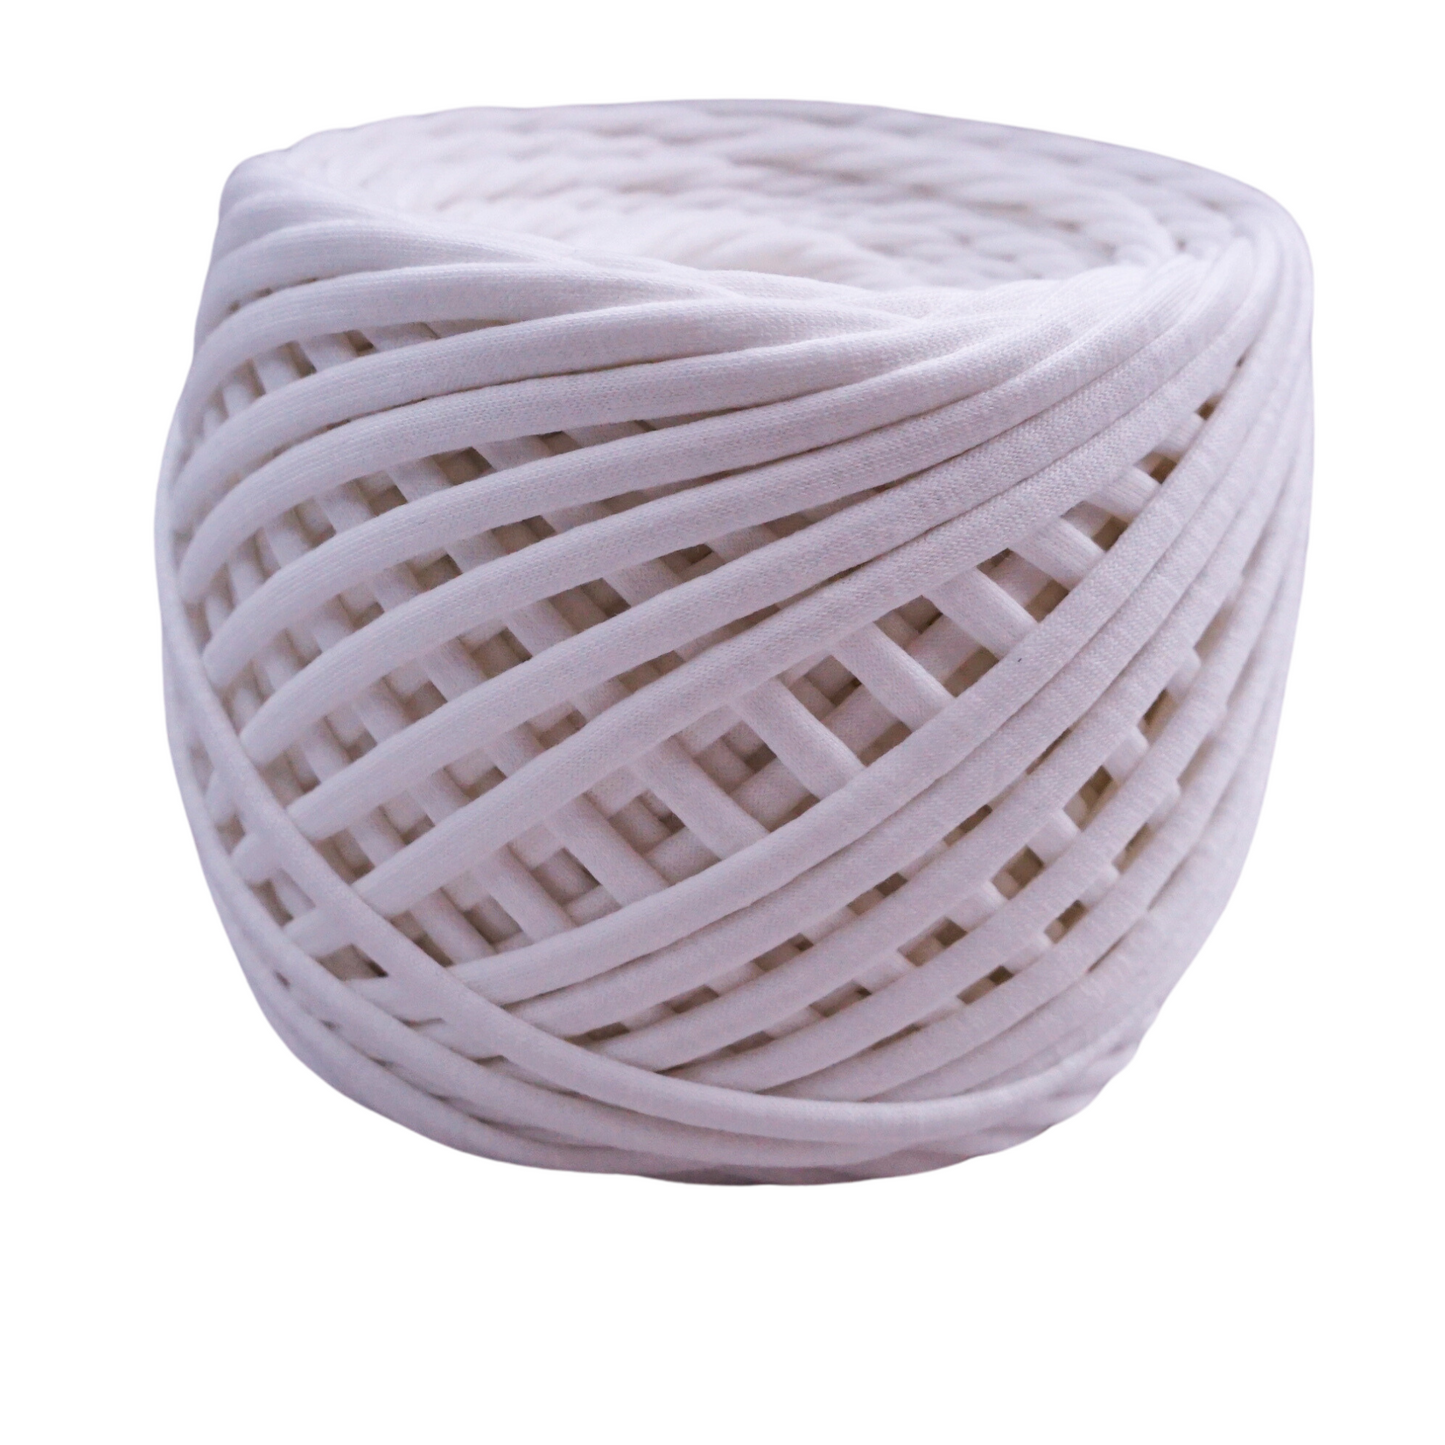 T-shirt yarn for crocheting baskets, bags, rugs and home decor. White